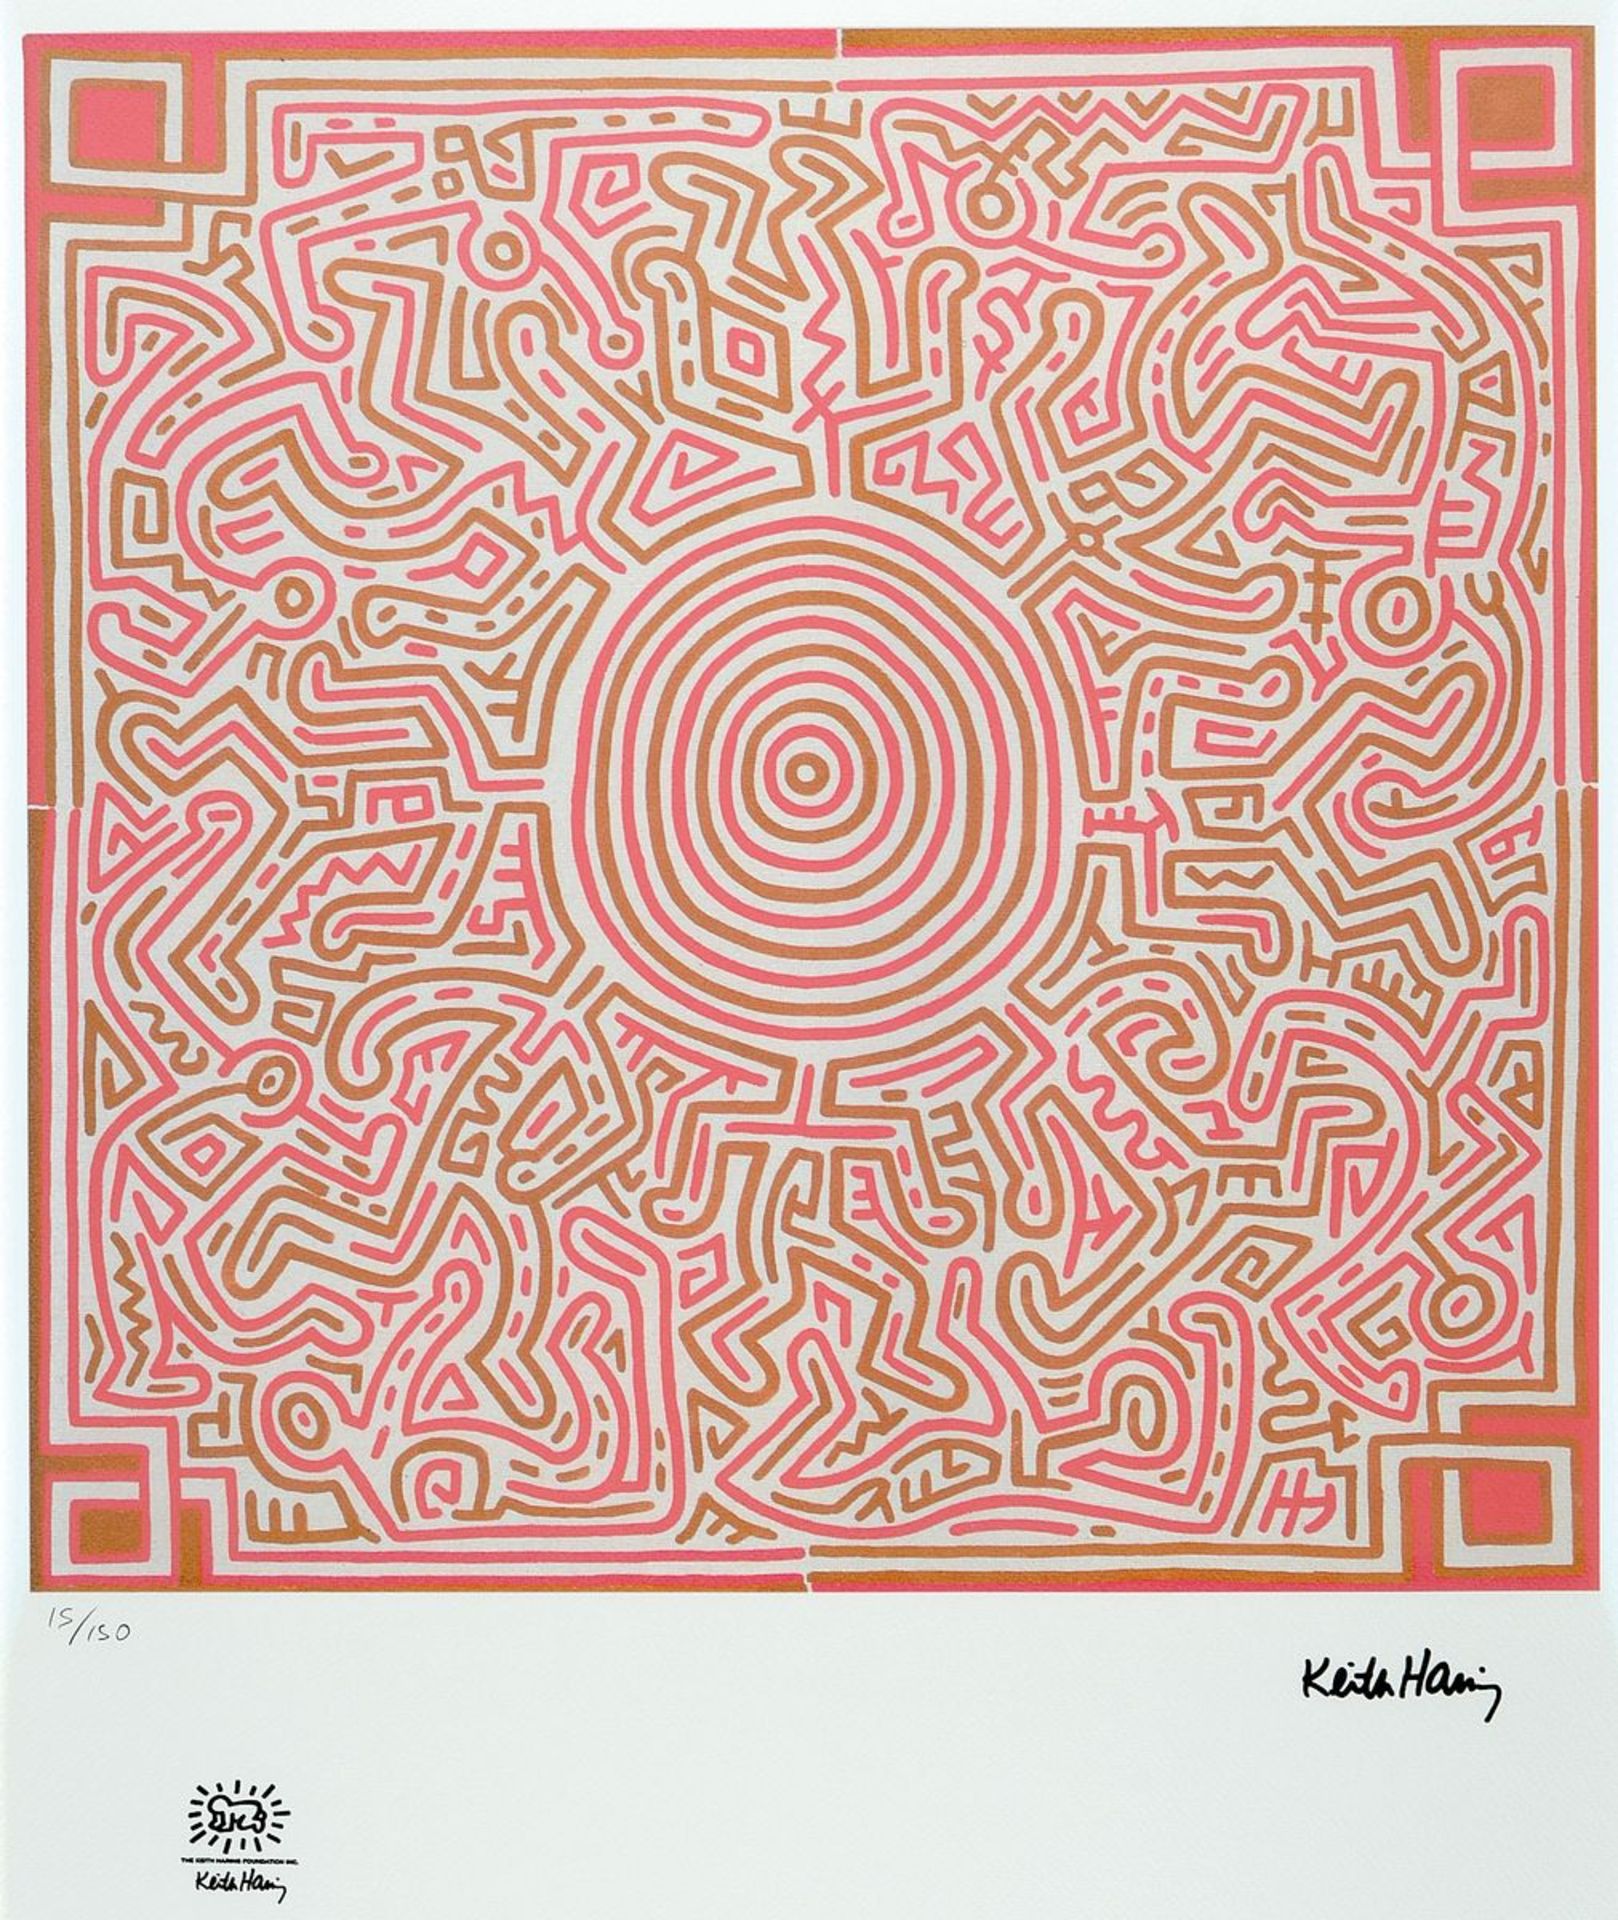 Keith Haring, 1929-1995, color lithograph on wove paper, num. 15/150, with Keith Haring Estate